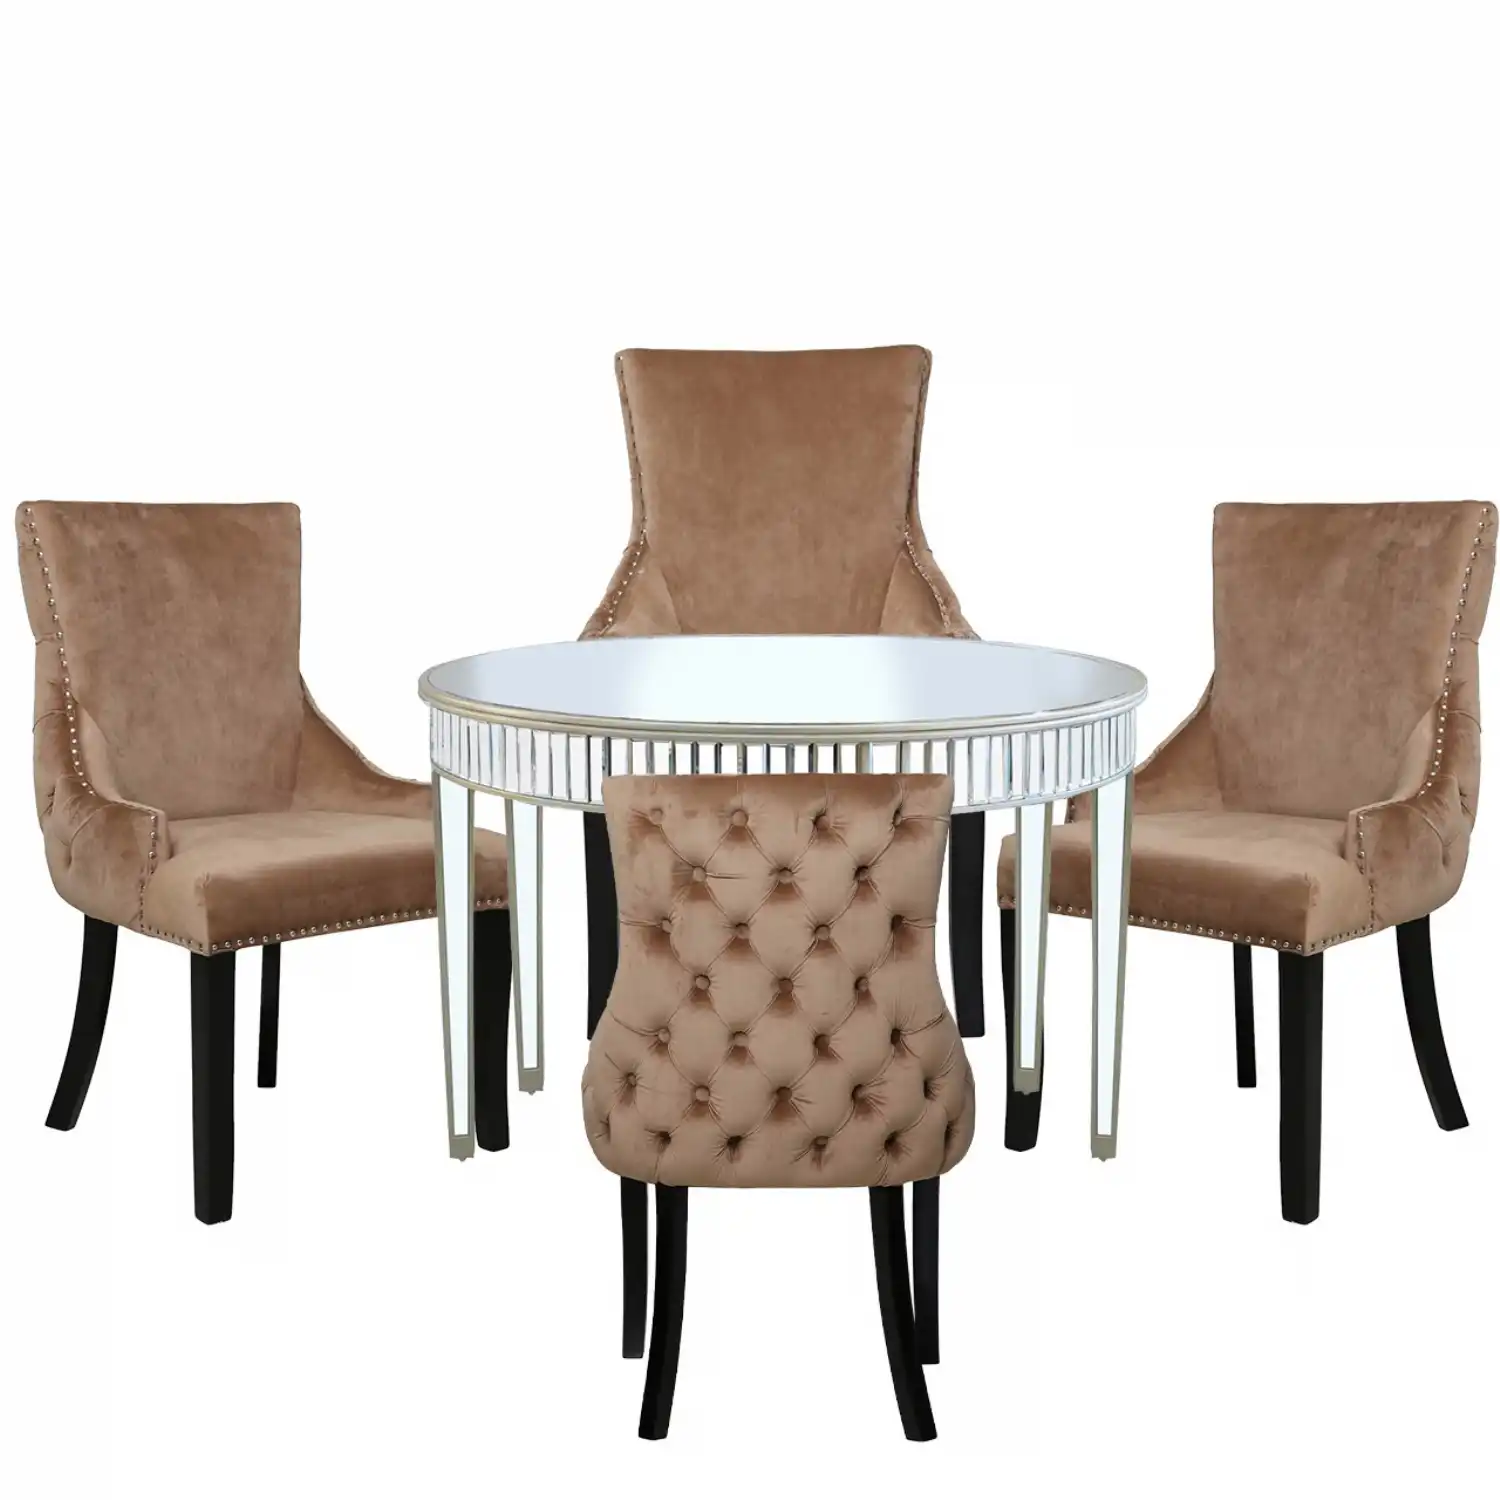 Mirrored Round Dining Table Set with 4 Champagne Chairs